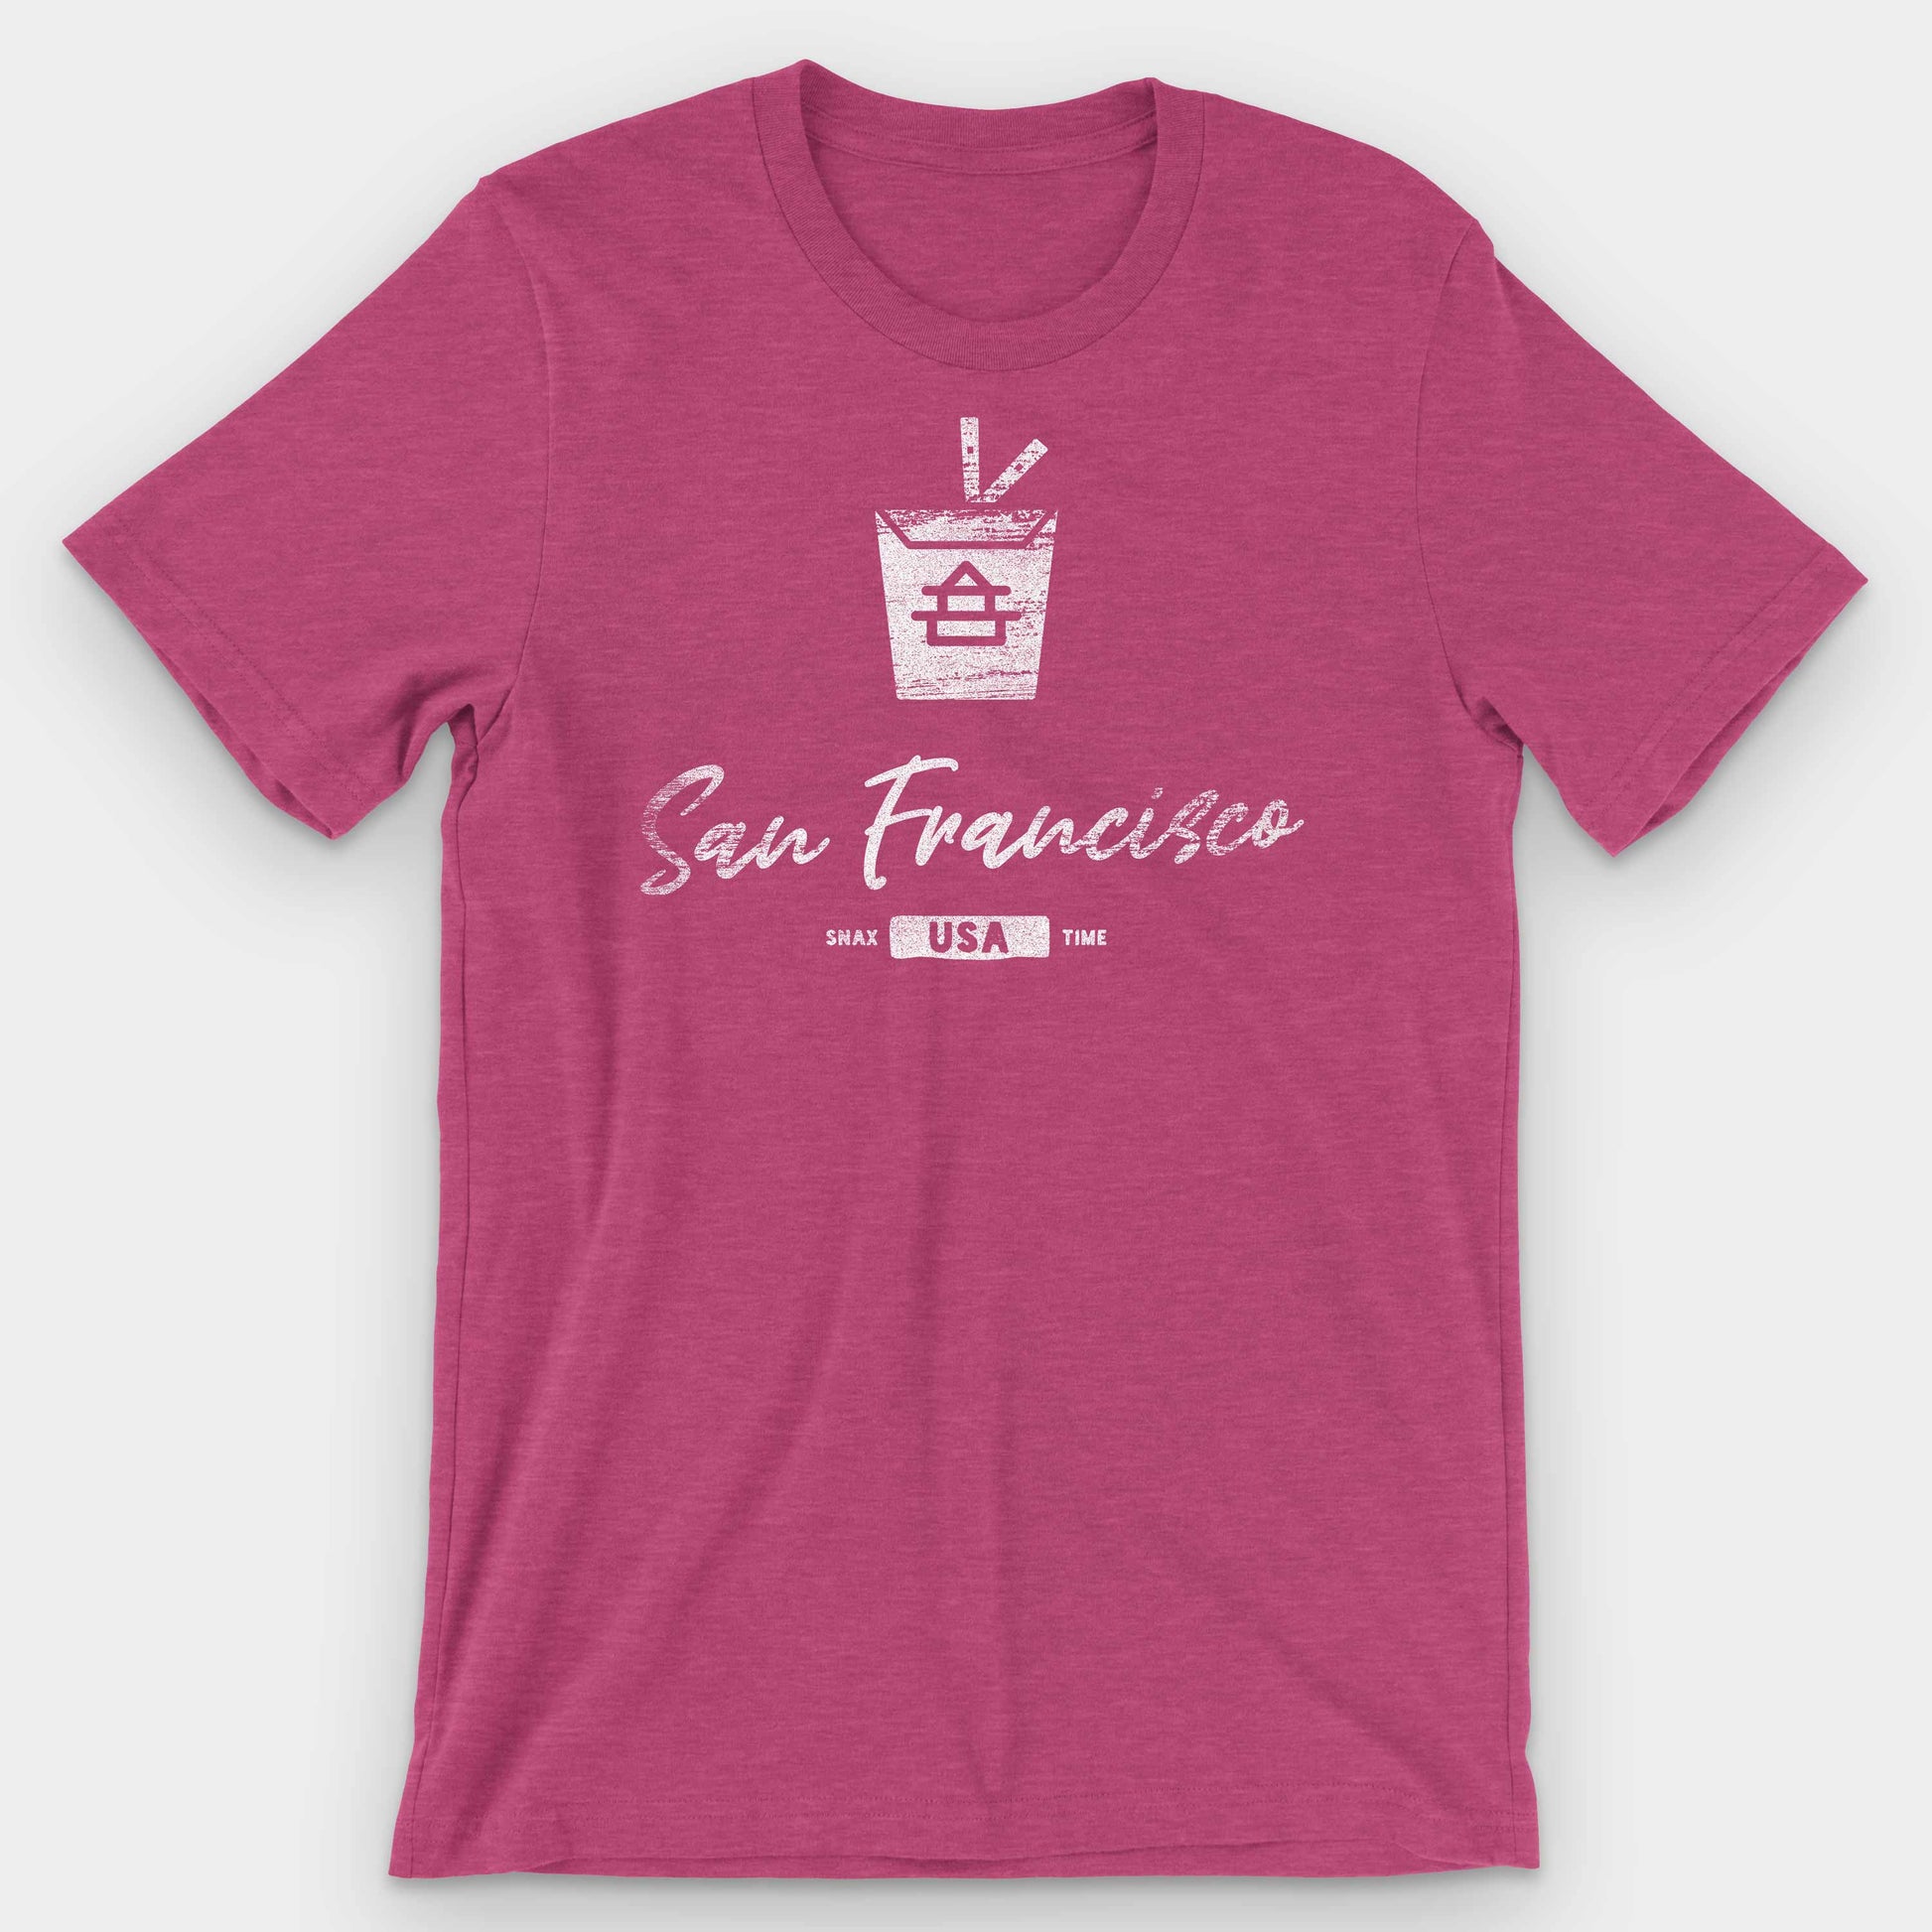 Heather Raspberry San Francisco Chinese Takeout Graphic T-Shirt by Snaxtime